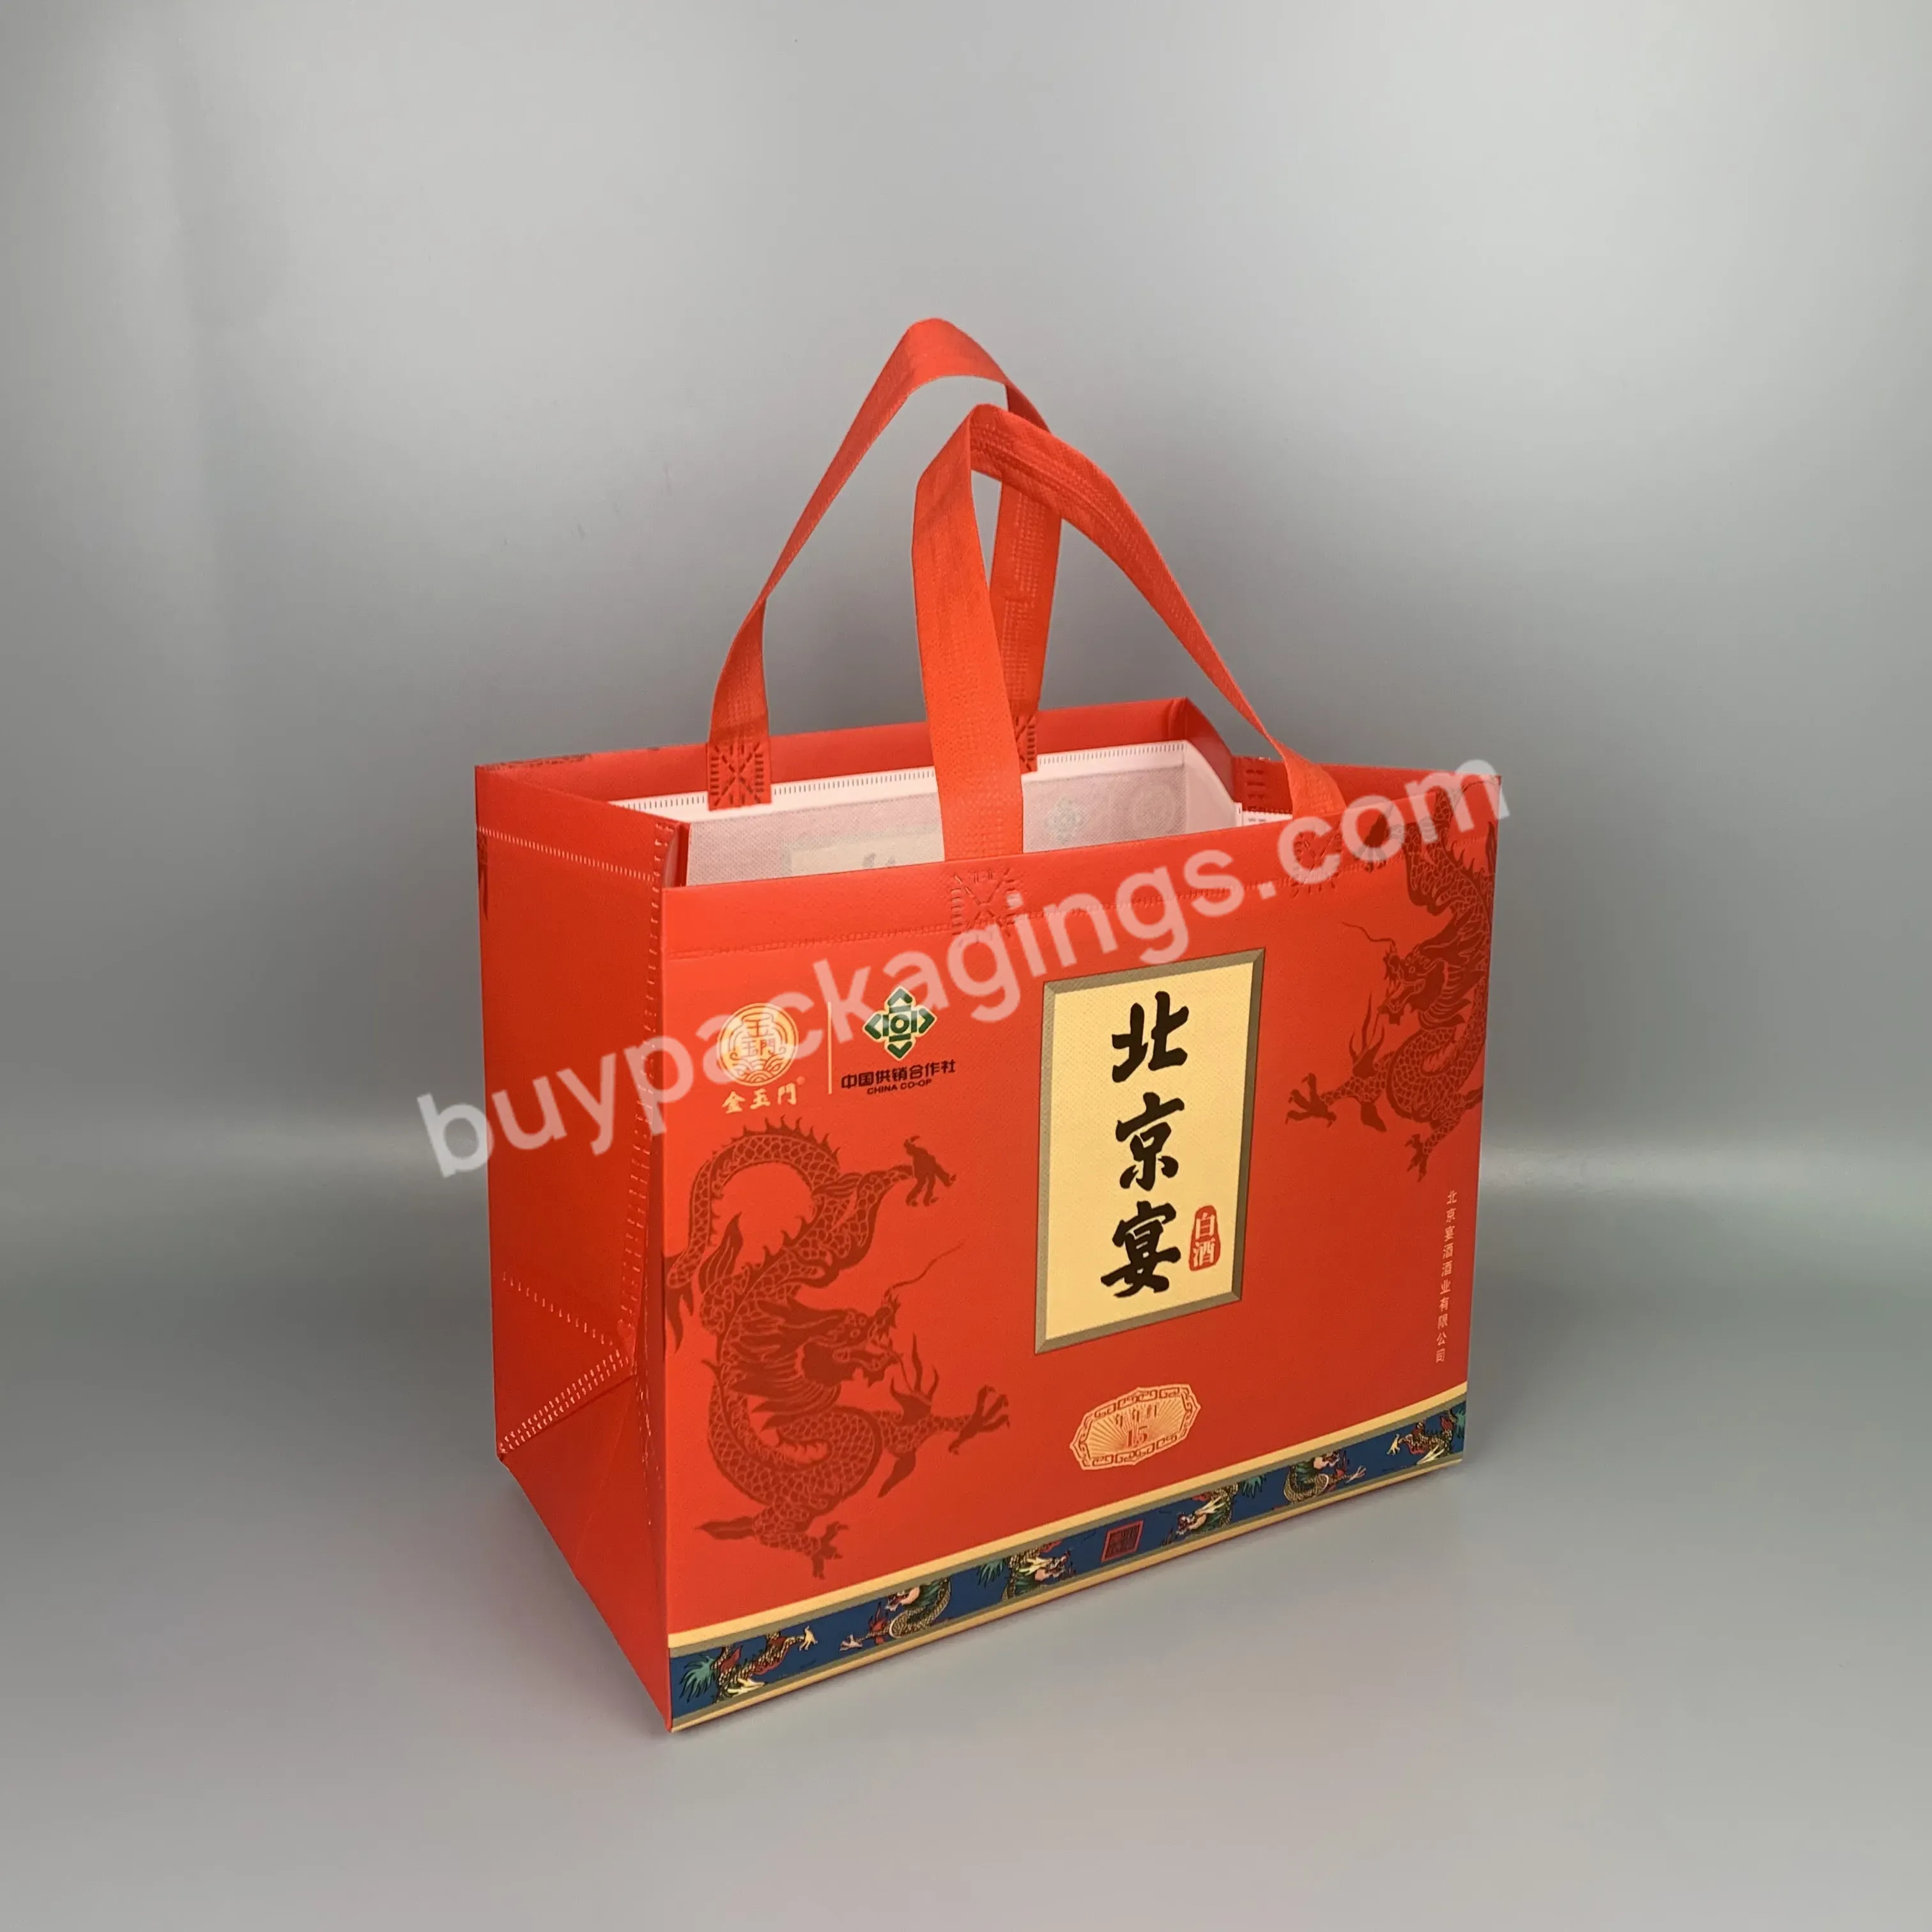 Hot Sale Fashionable And Eco-friendly Reusable Washable Supermarket Use Pp Non Woven Tote Bag For Shopping - Buy Hot Sale Fashionable And Eco-friendly Reuseable Washable For Supermarket Use,Pp Non Woven Tote Bag,Customize Logo For Shopping.